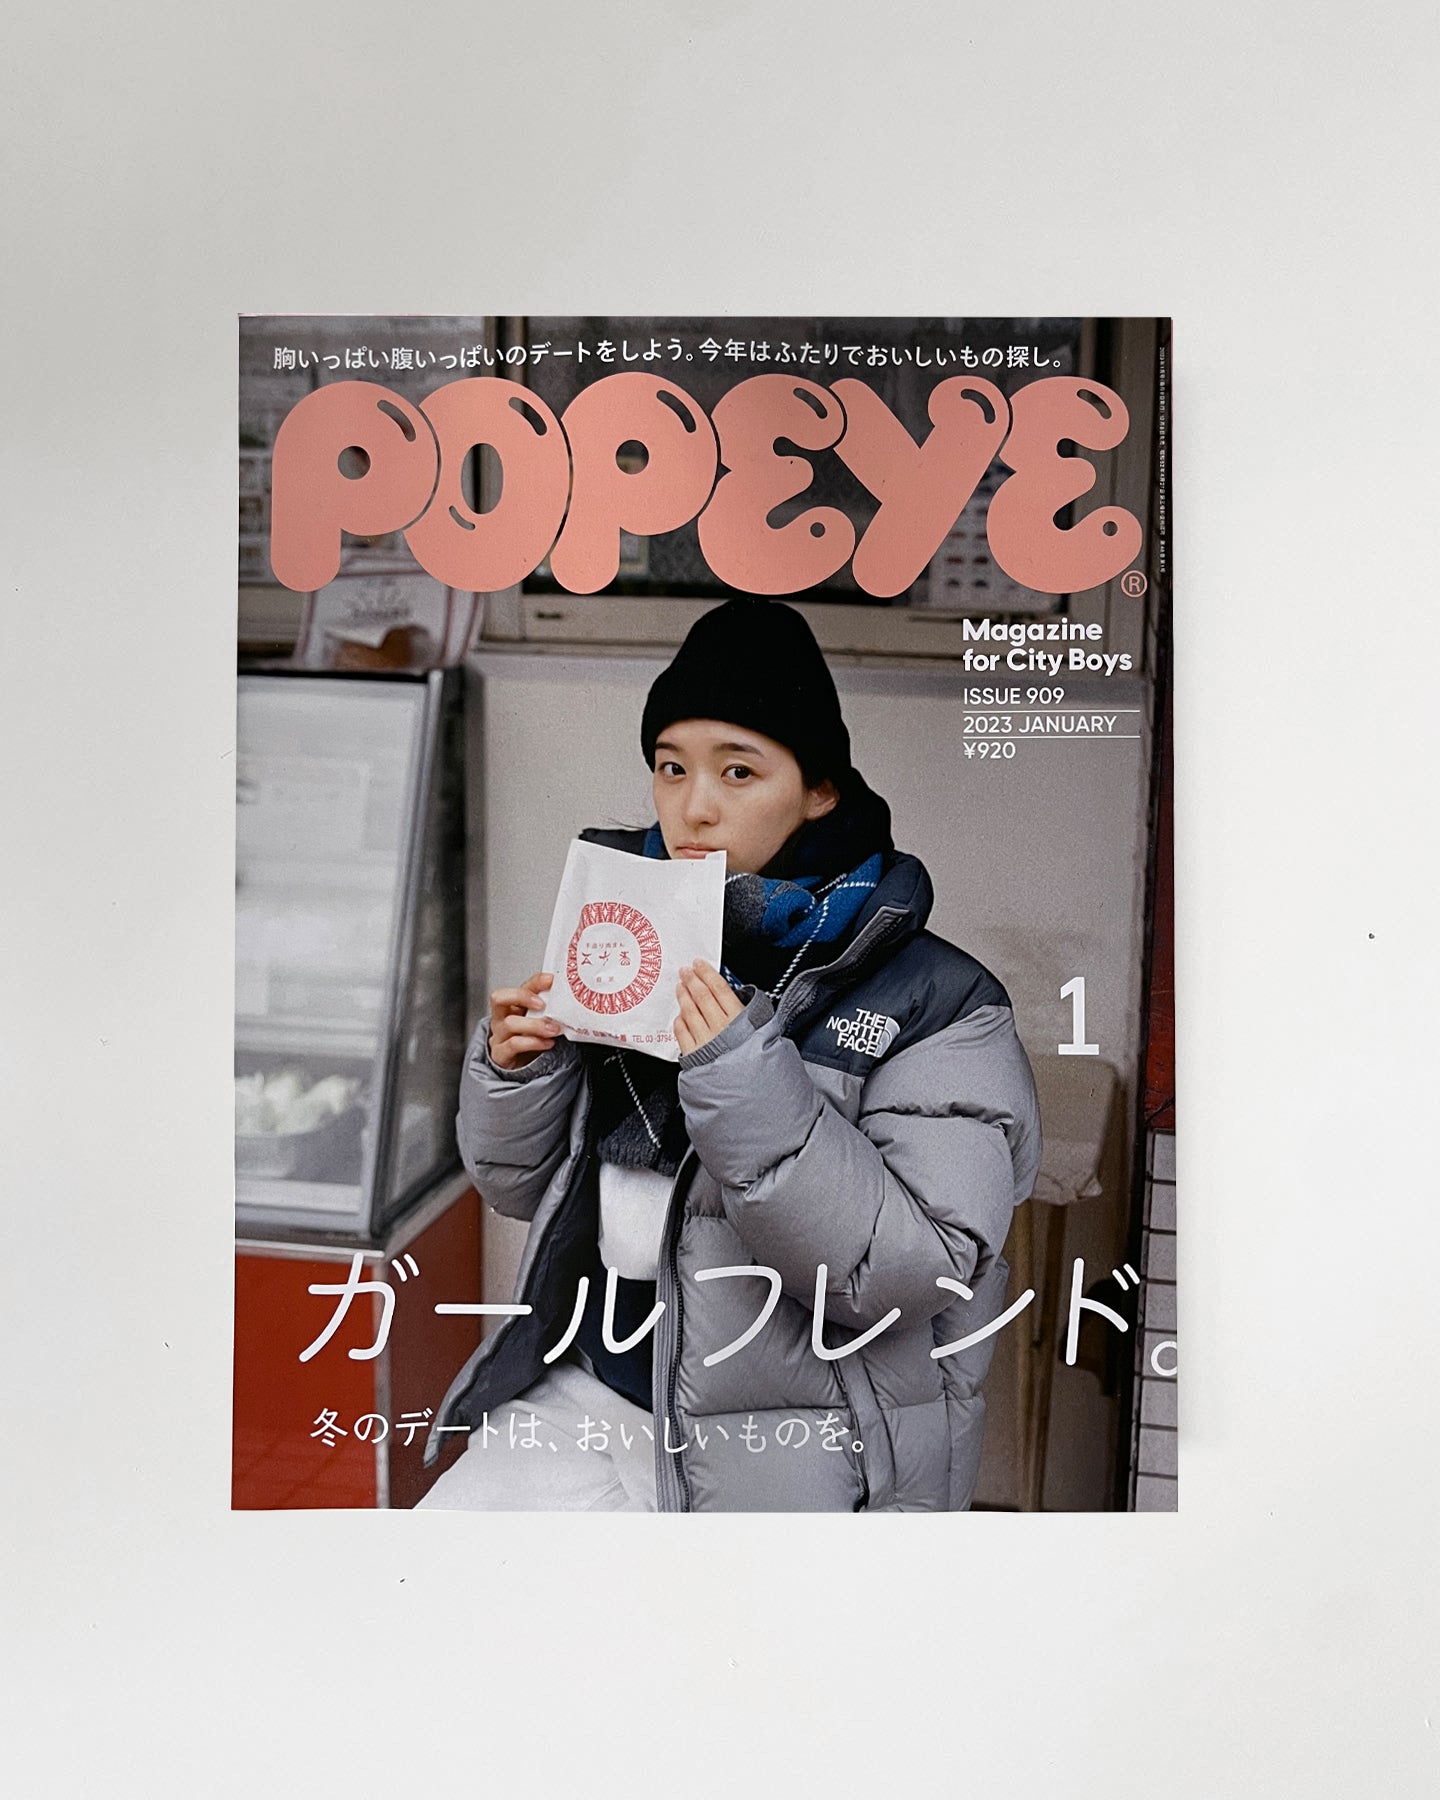 Popeye Issue 909 January Cover